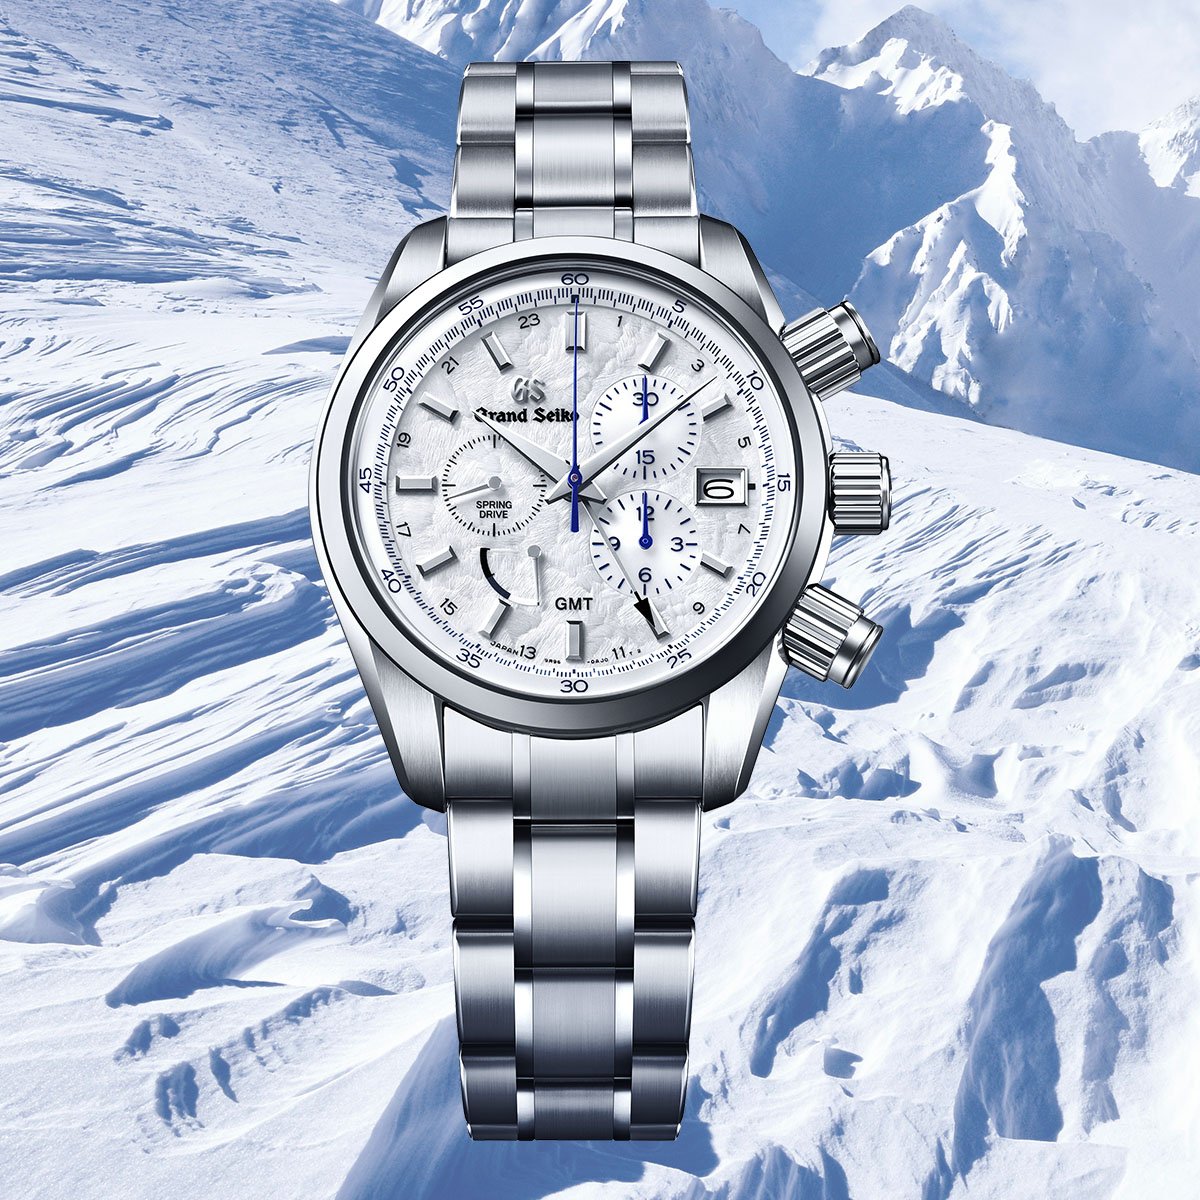 Introducing The Grand Seiko GMT Sports SBGE275 & SBGC247 Limited Edition  Watches